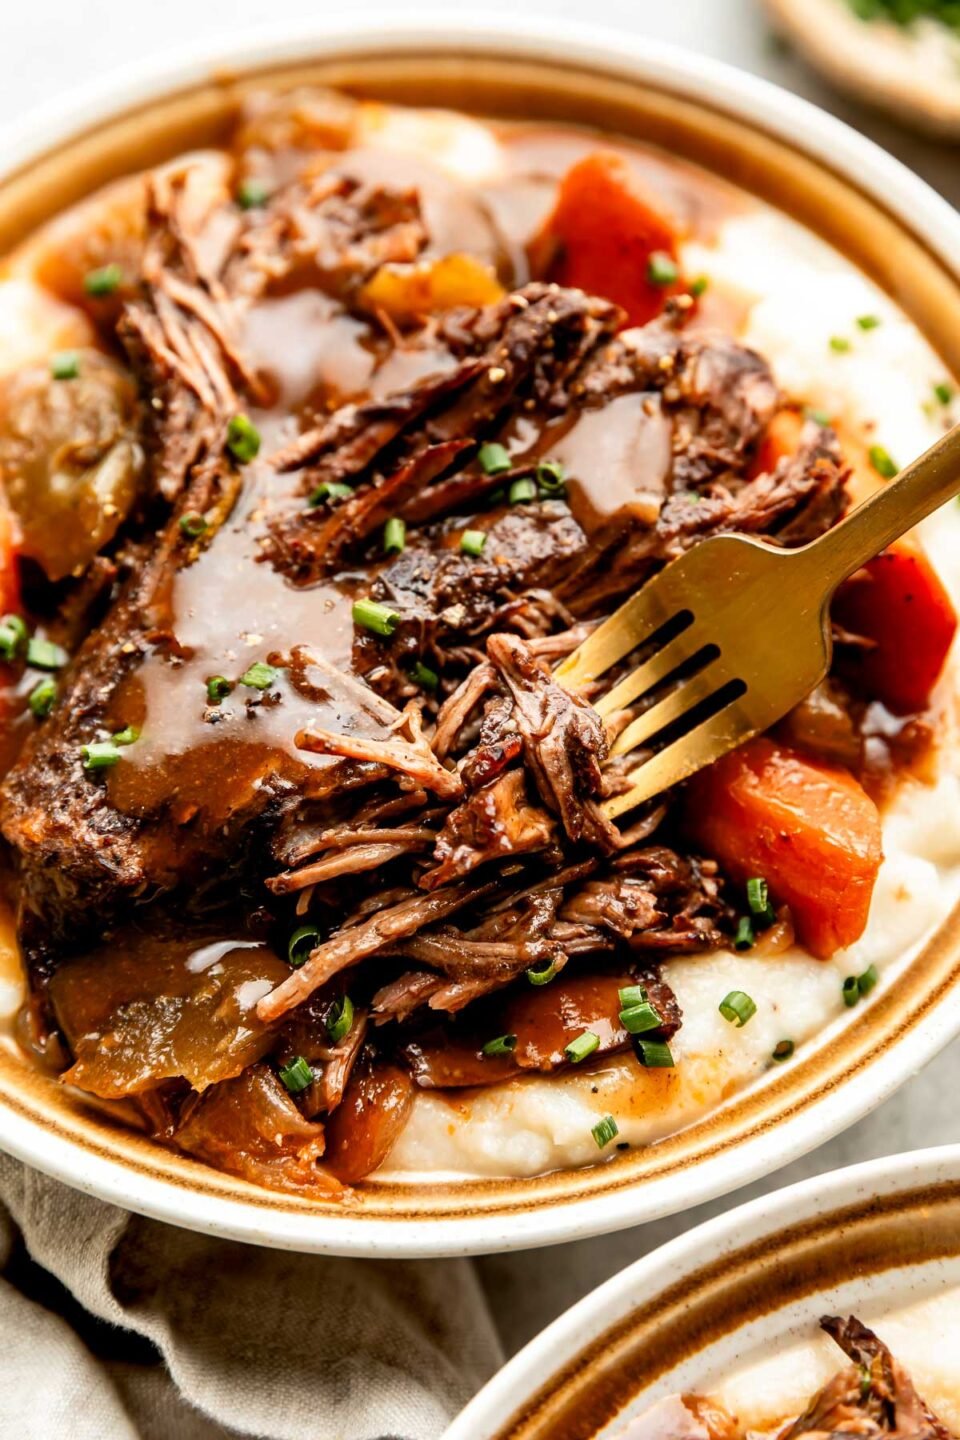 A close up side shot of a fork grabbing a bite of braised beef from a plate of beef on a bed of mashed potatoes and vegetables.